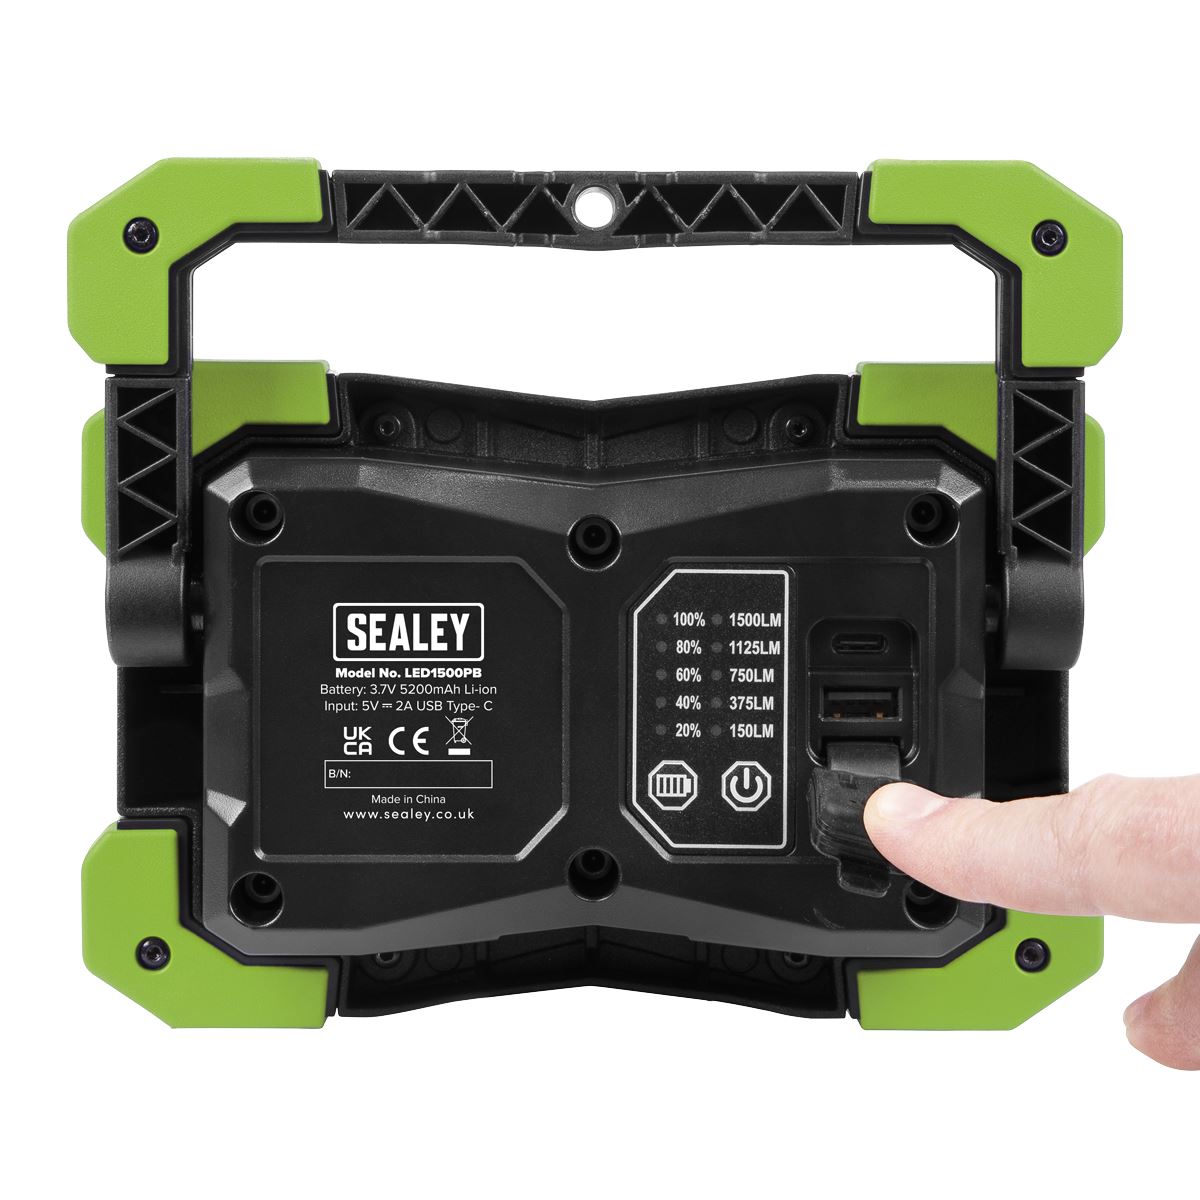 Sealey 15W COB LED Portable Floodlight and Power Bank